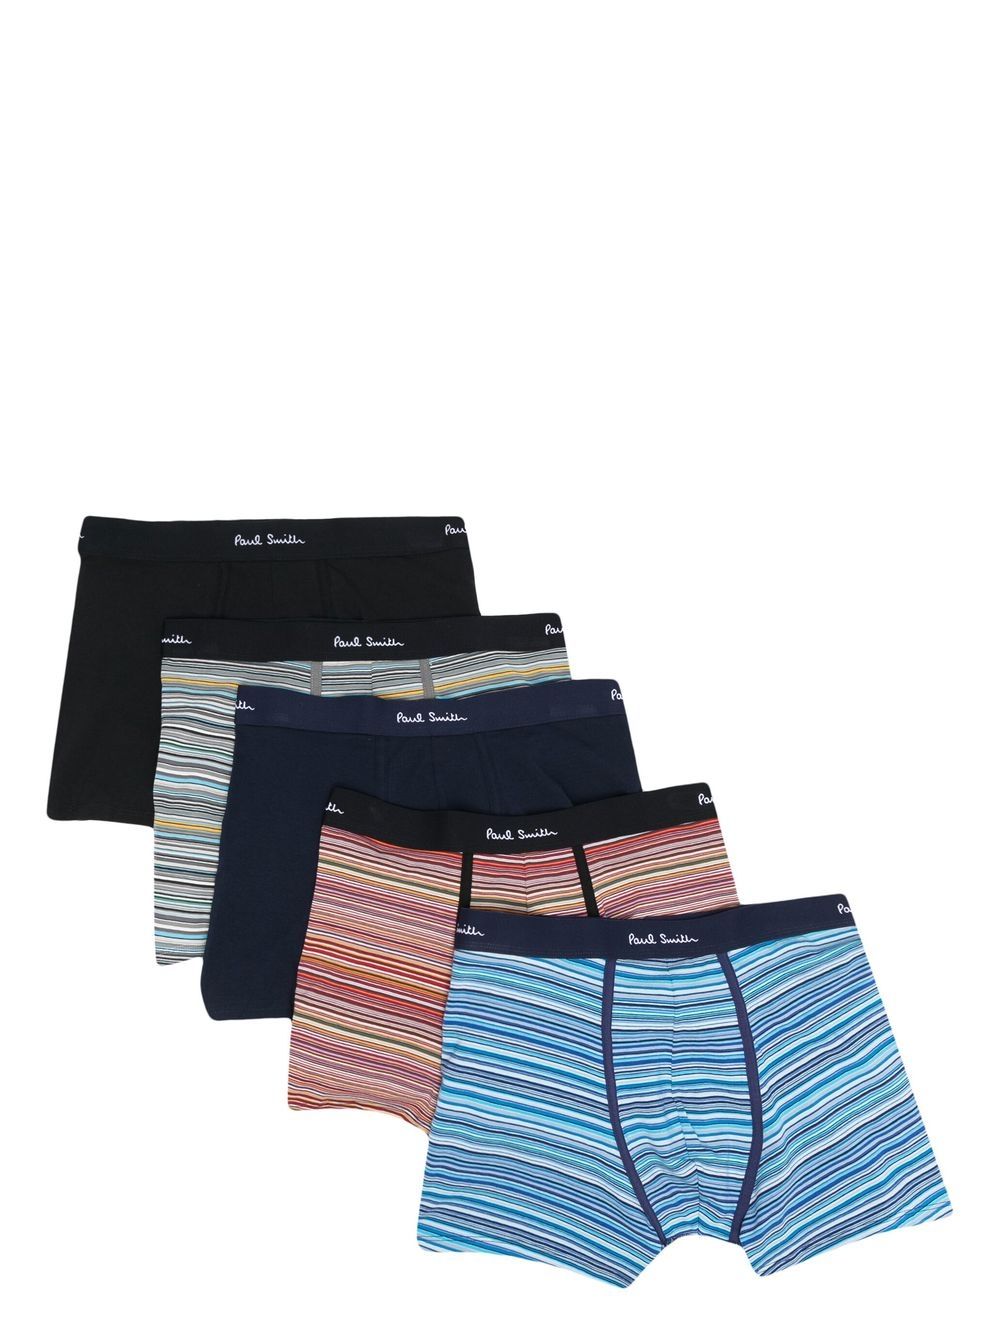 Paul Smith Signature Stripe And Plain Boxers 5-pack Set In Black